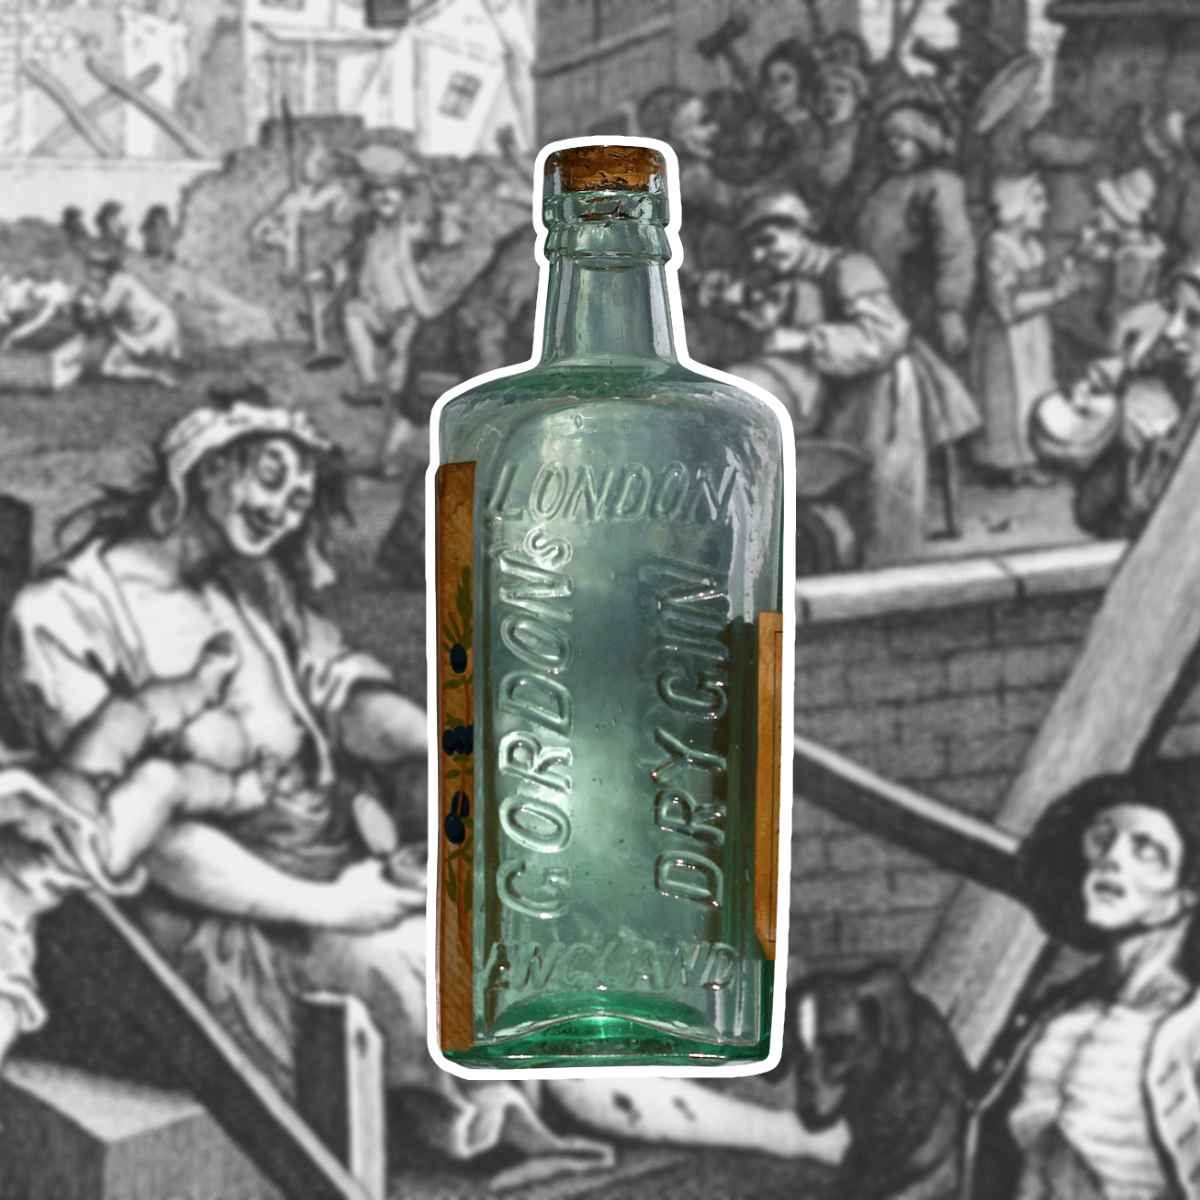 History of Gin - Gin lane and old bottle of Gin